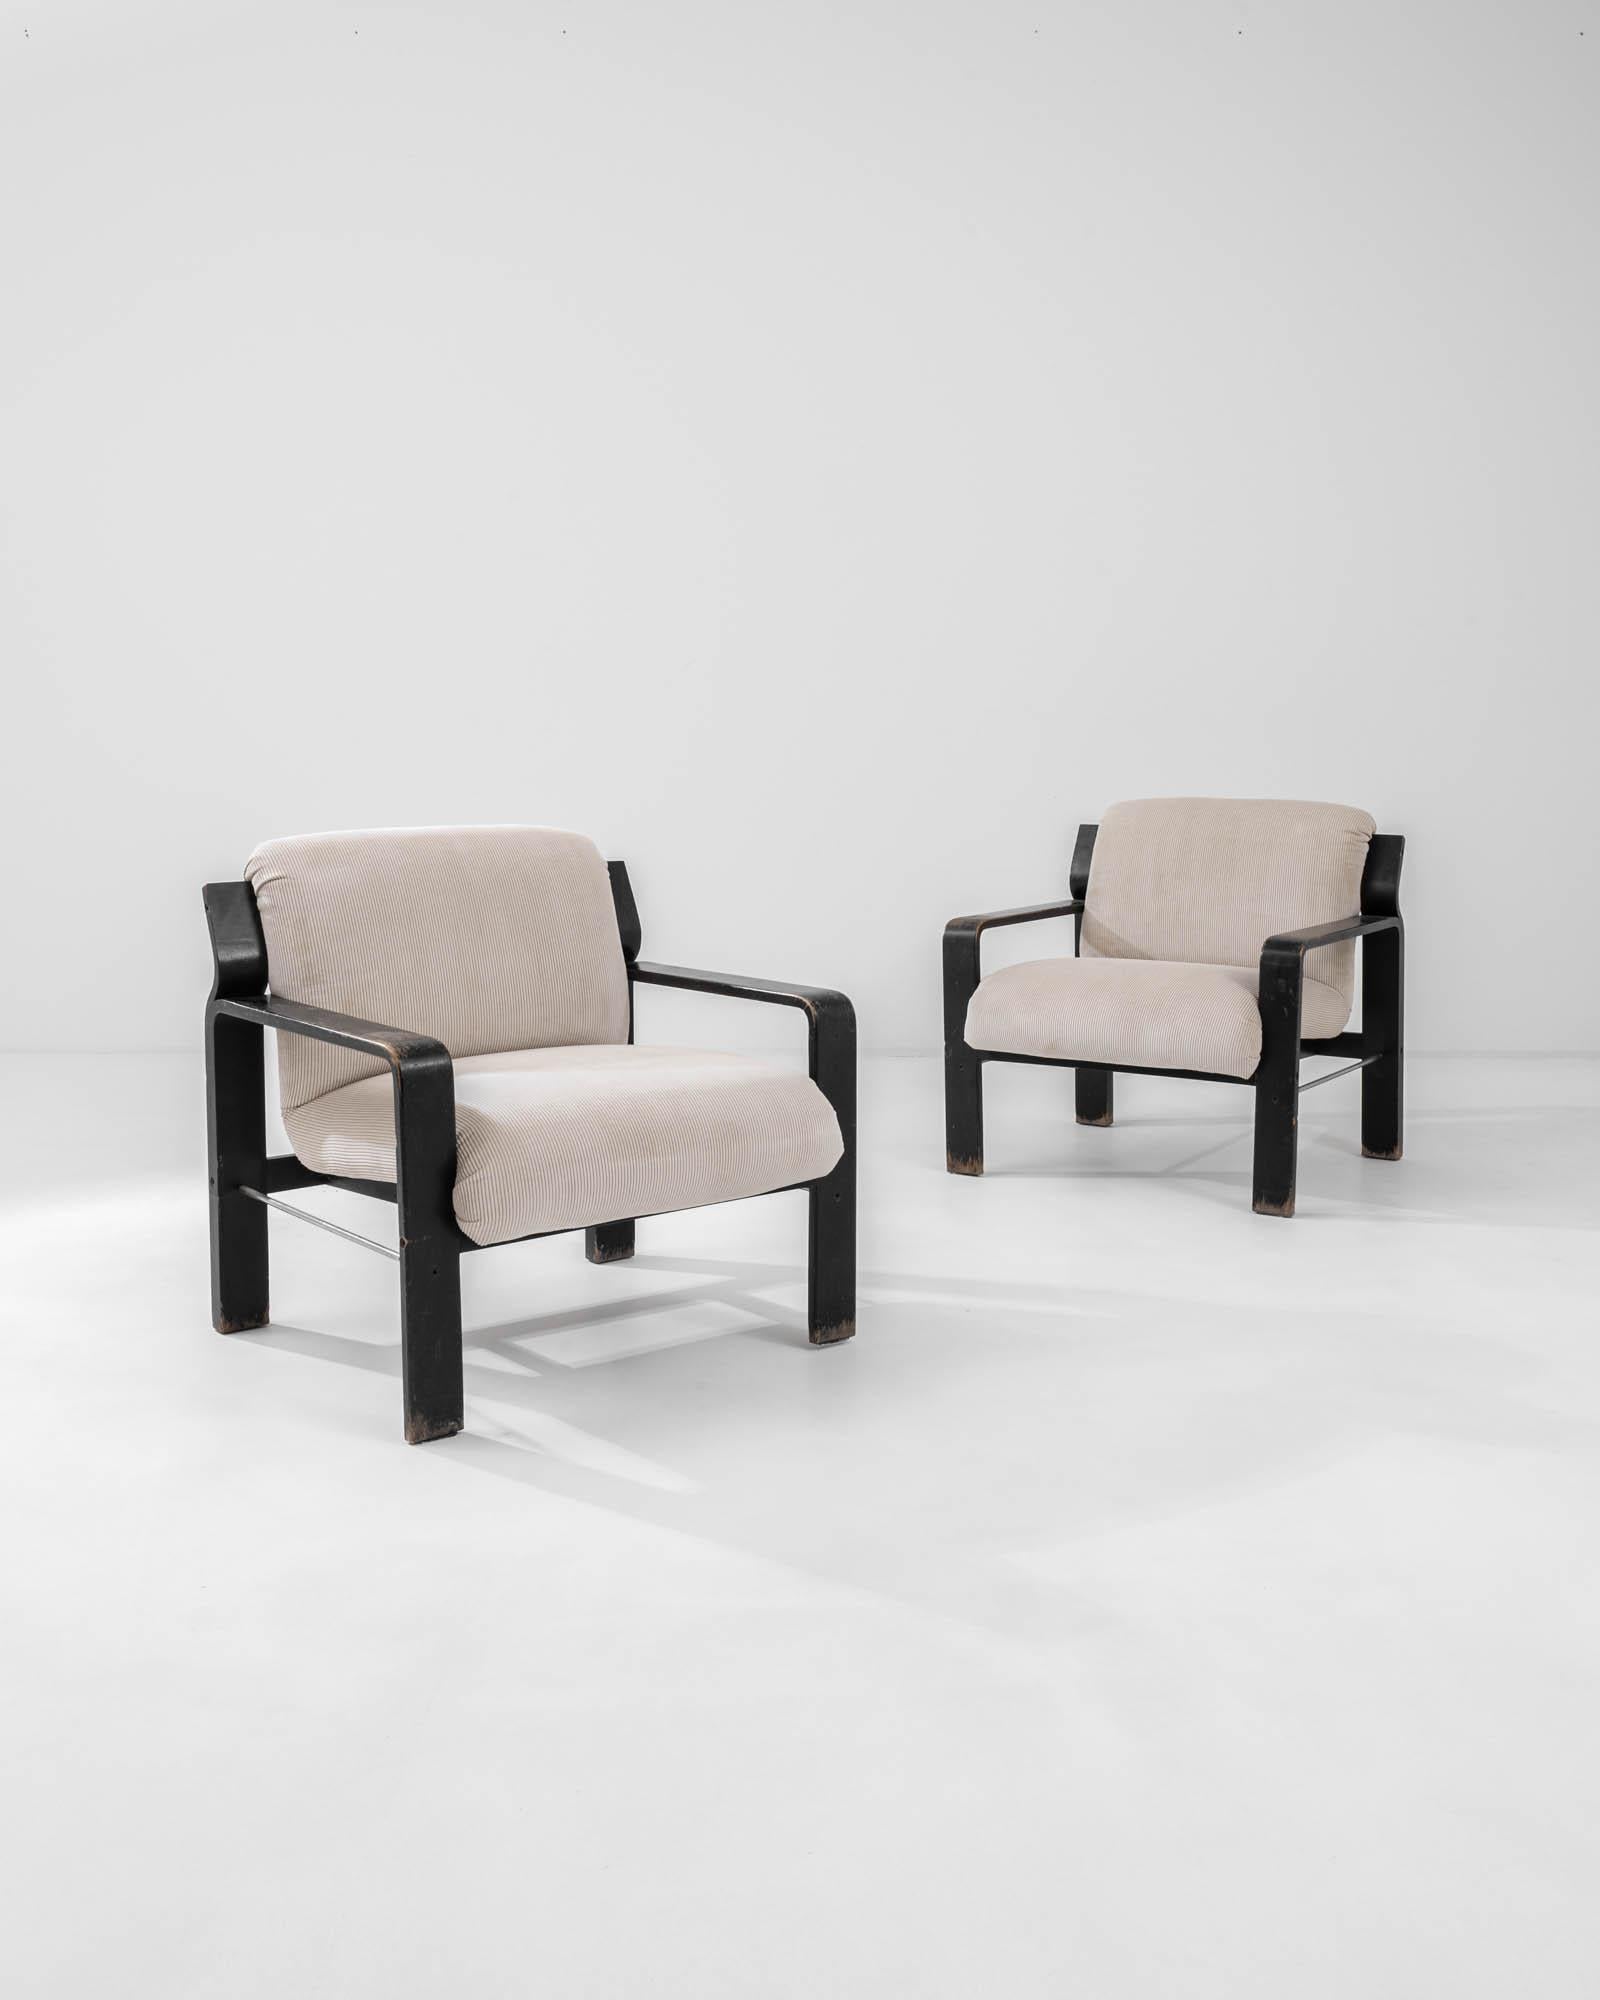 Effortlessly combining style and comfort, this pair of Mid Century Modern armchairs are a covetable find. Produced in the 1960s in the former Czechoslovakia, the design is attributed to Ludvik Volak, an architect and furniture designer known for his